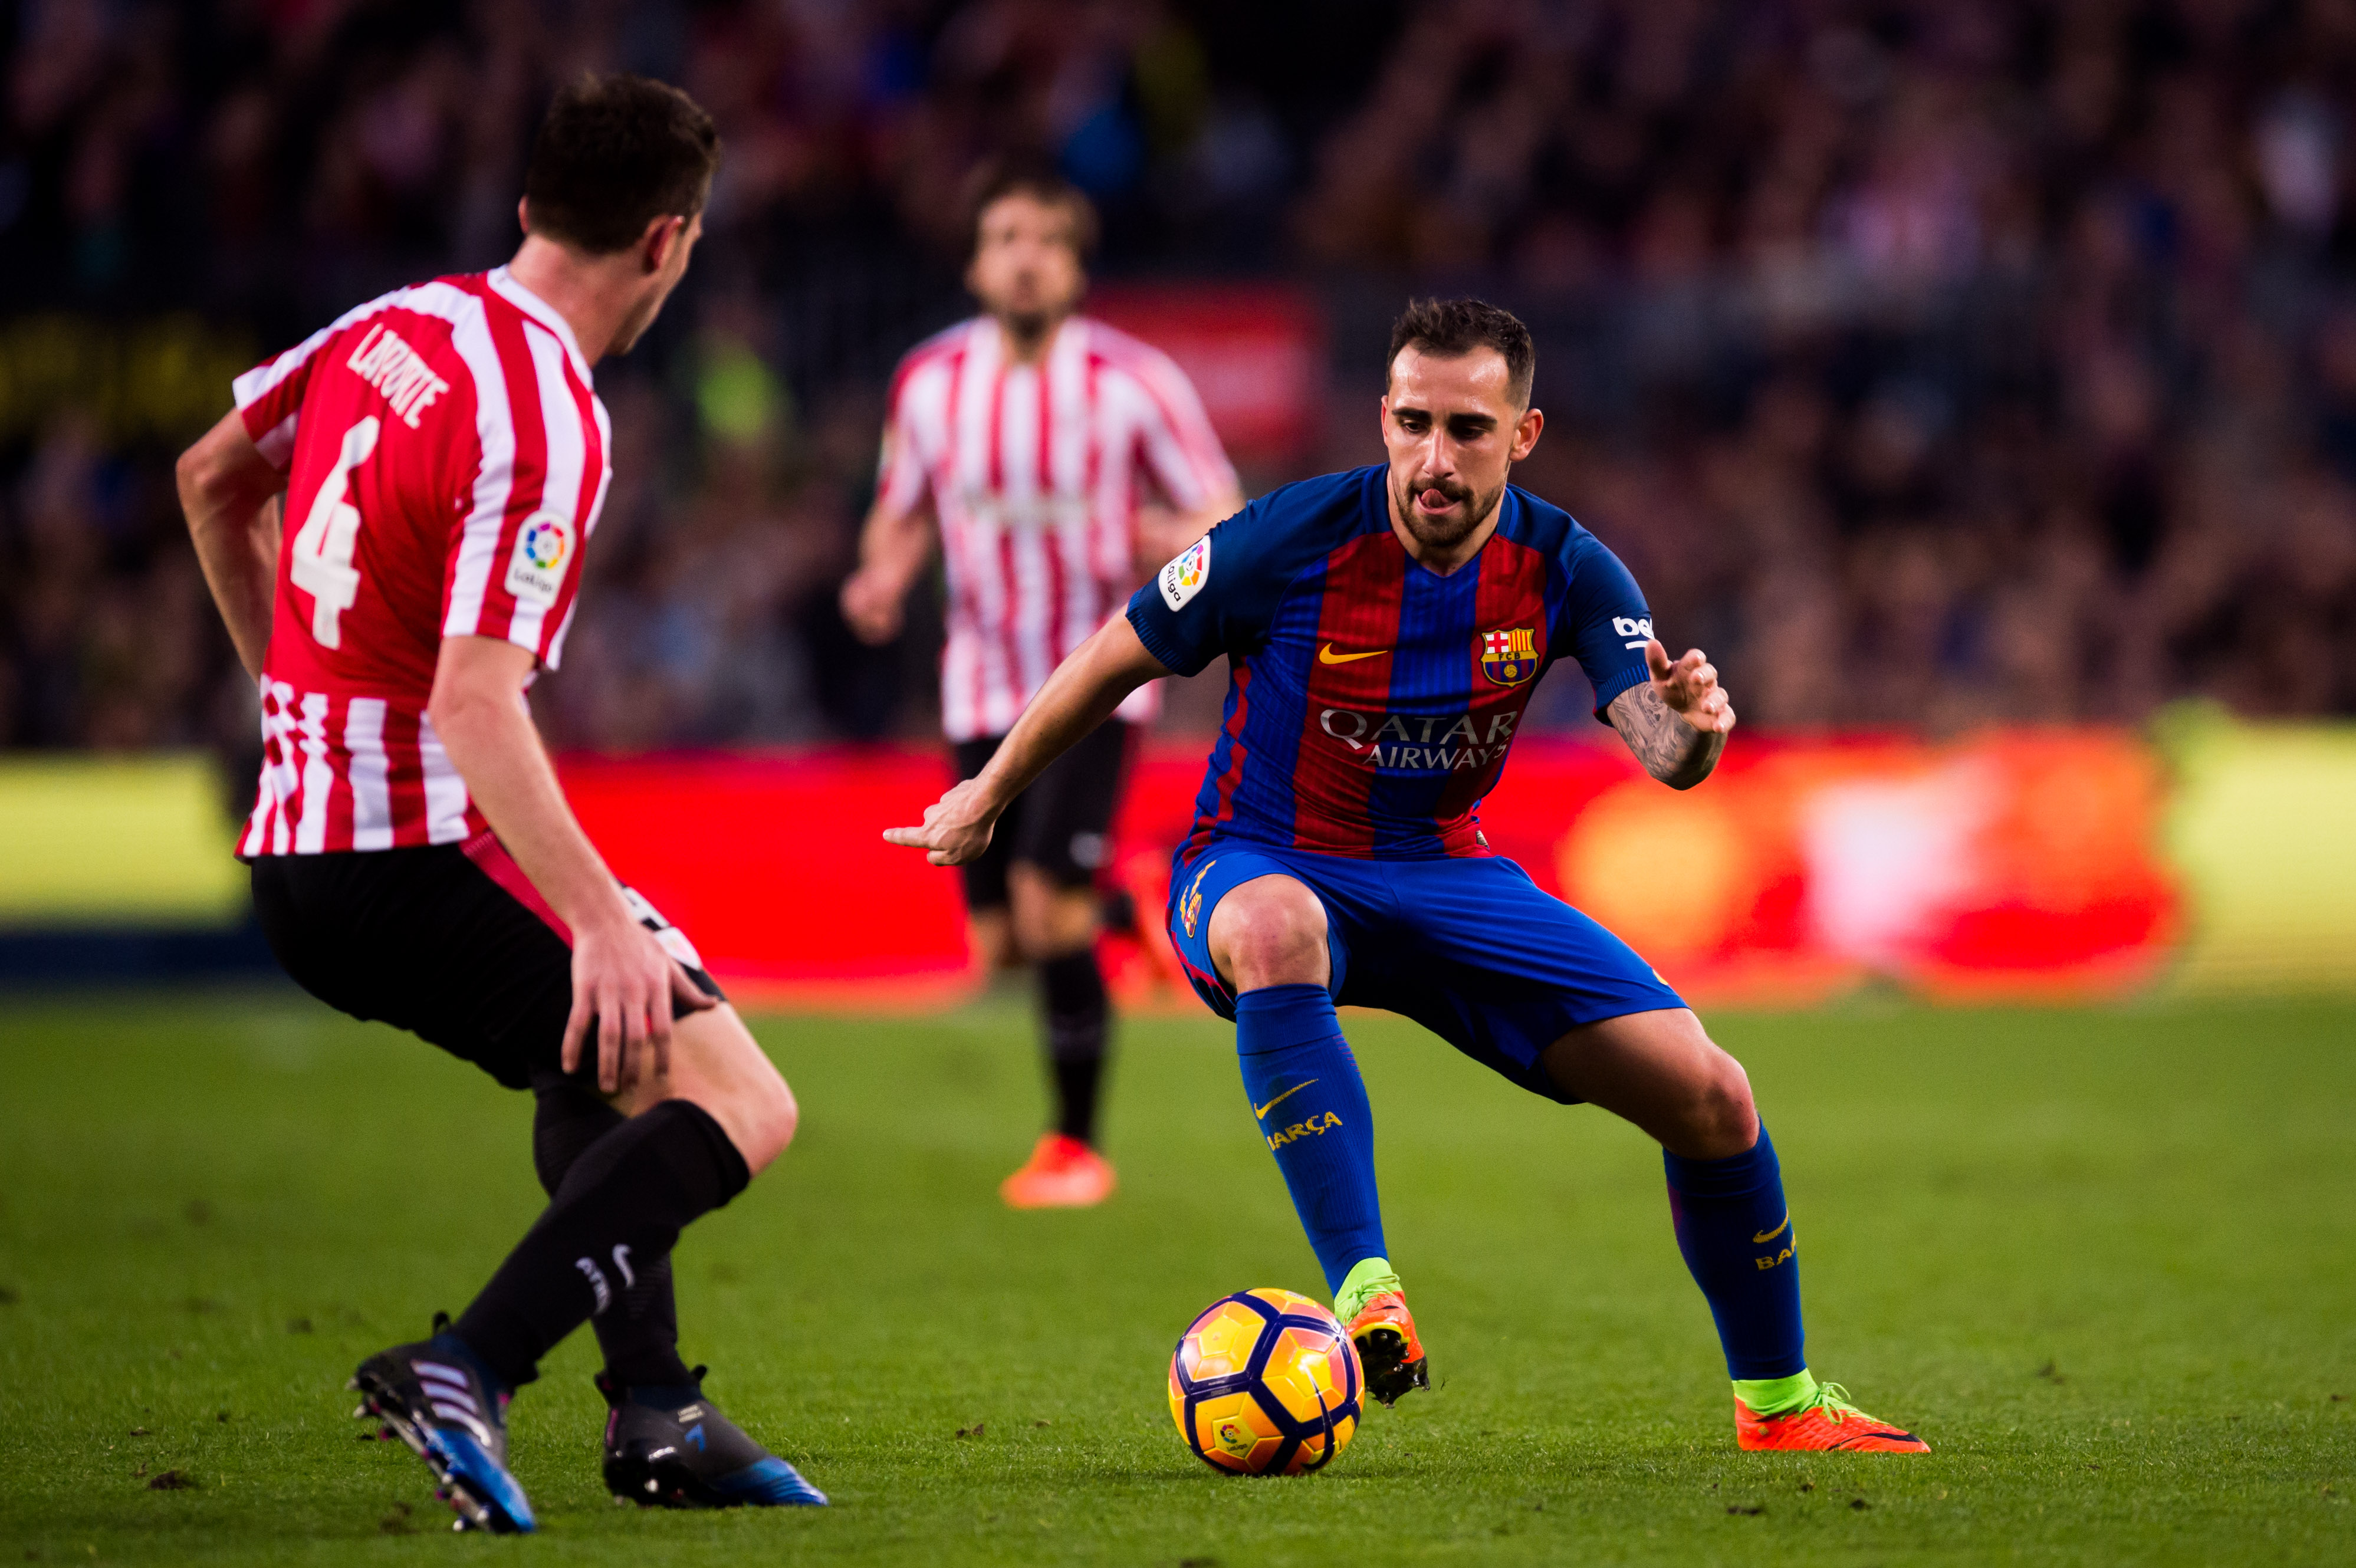 BARCELONA, SPAIN - FEBRUARY 04: Paco Alcacer of FC Barcelona dribbles Aymeric Laporte of Athletic Club during the La Liga match between FC Barcelona and Athletic Club at Camp Nou stadium on February 4, 2017 in Barcelona, Spain. (Photo by Alex Caparros/Getty Images)